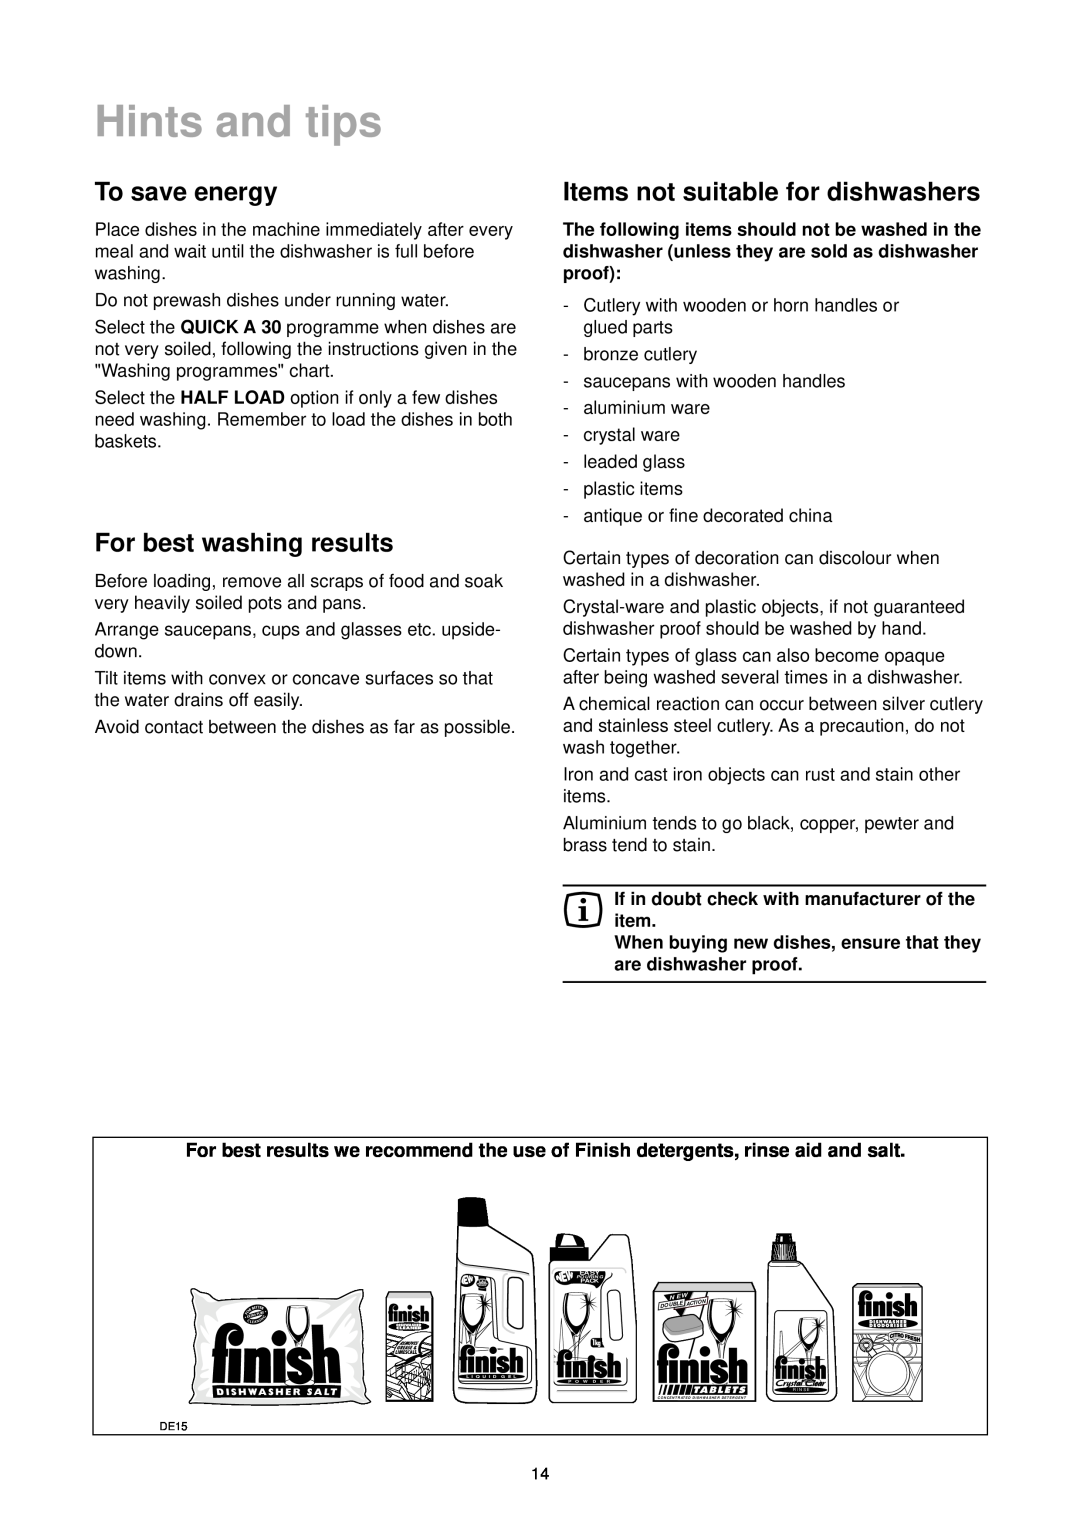 Zanussi DE 4744 Hints and tips, To save energy, For best washing results, Items not suitable for dishwashers, Half Load 